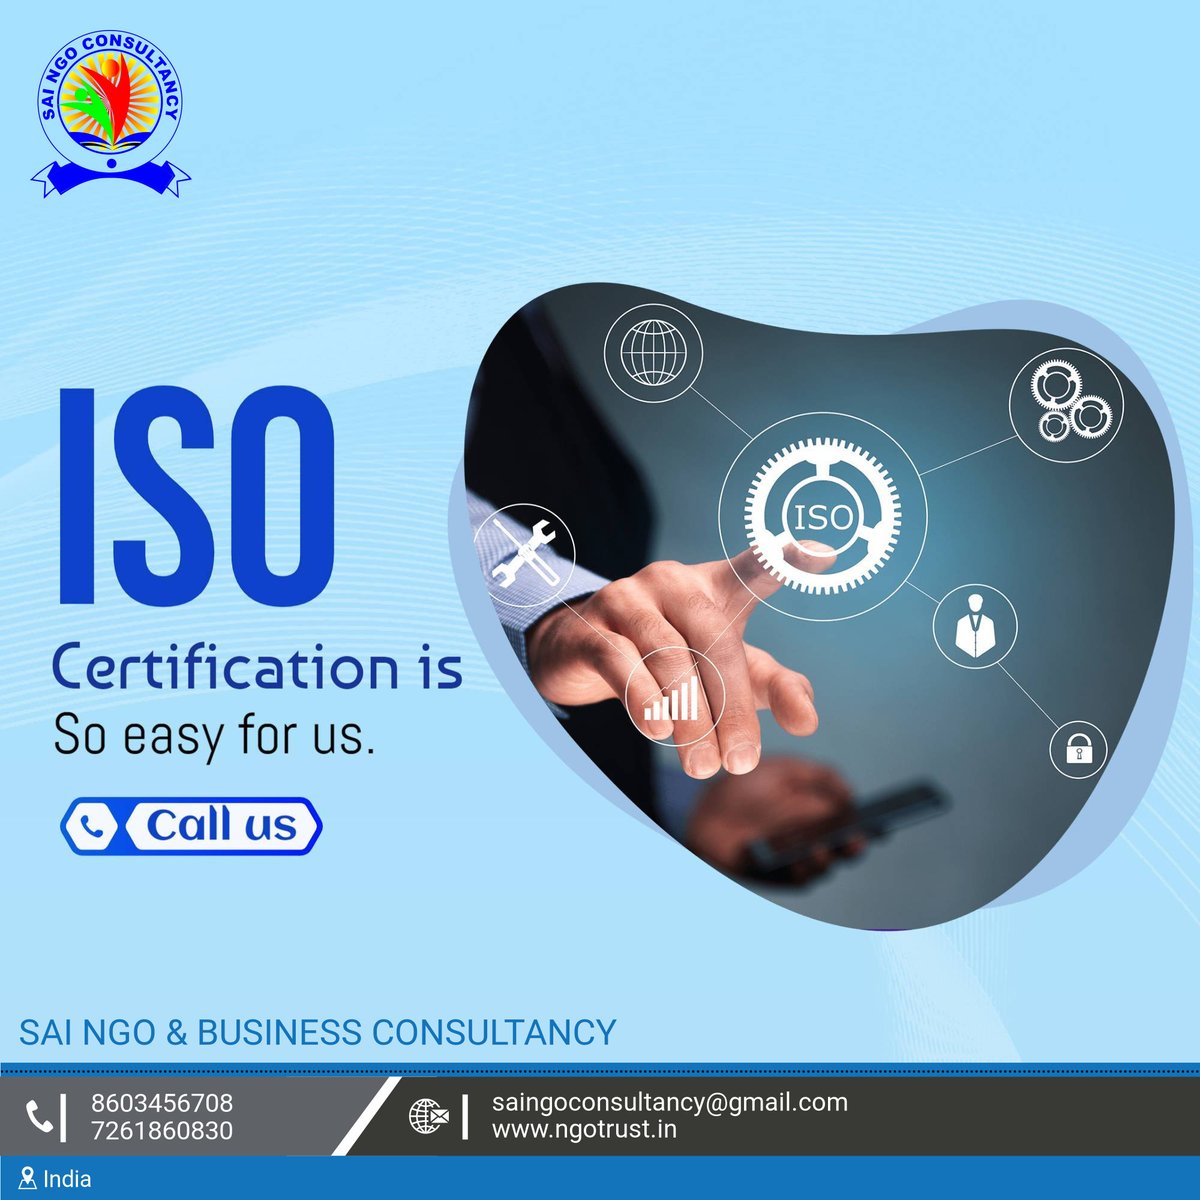 Bring a new level of excellence to your business with our fast and affordable ISO certification services. Get ISO certified today and experience the benefits of advanced quality and safety standards.
#iso #isocertification
#iso  #certification #training #certificationbody